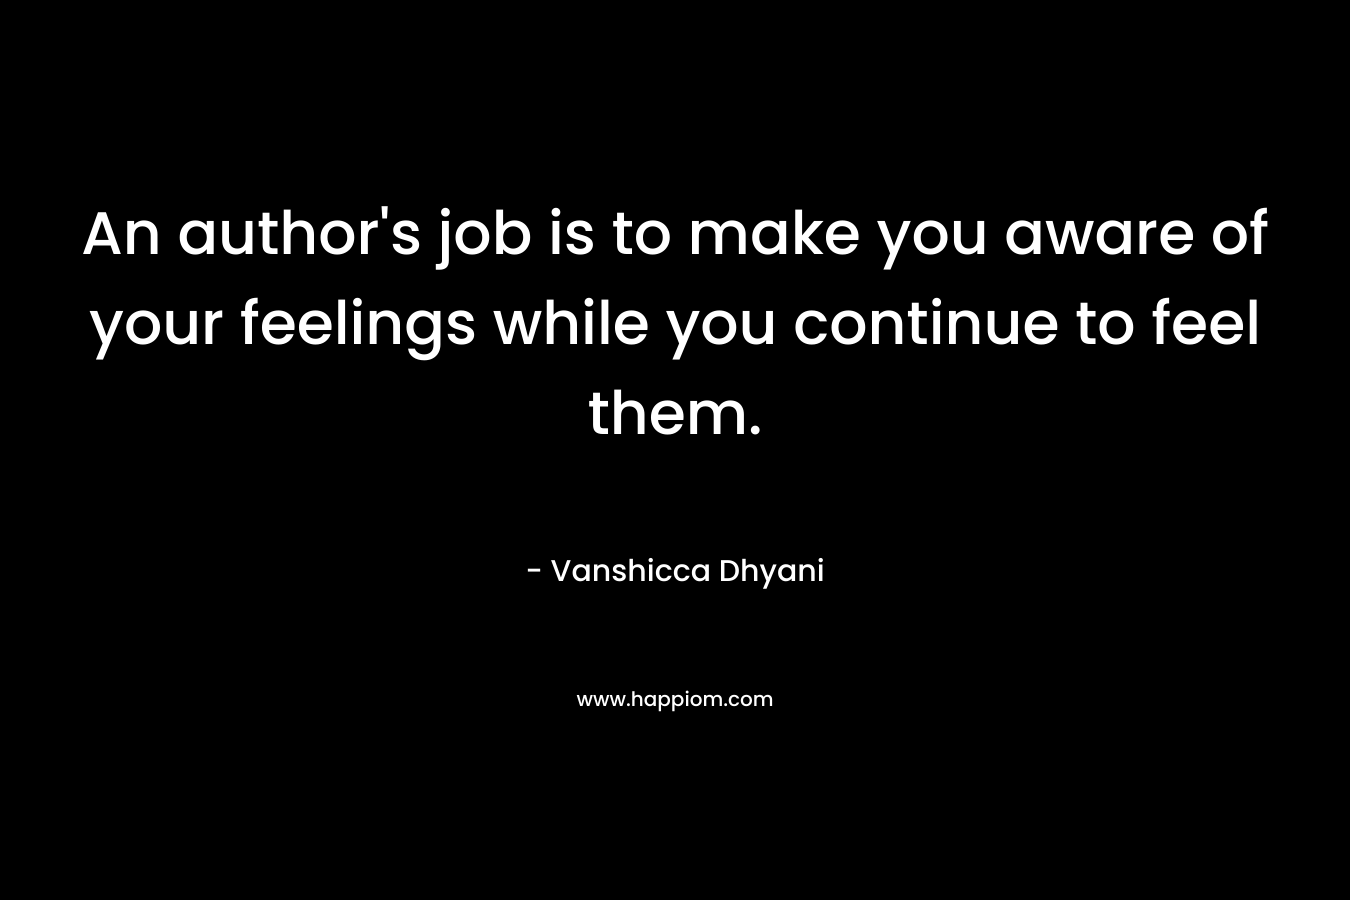 An author's job is to make you aware of your feelings while you continue to feel them.